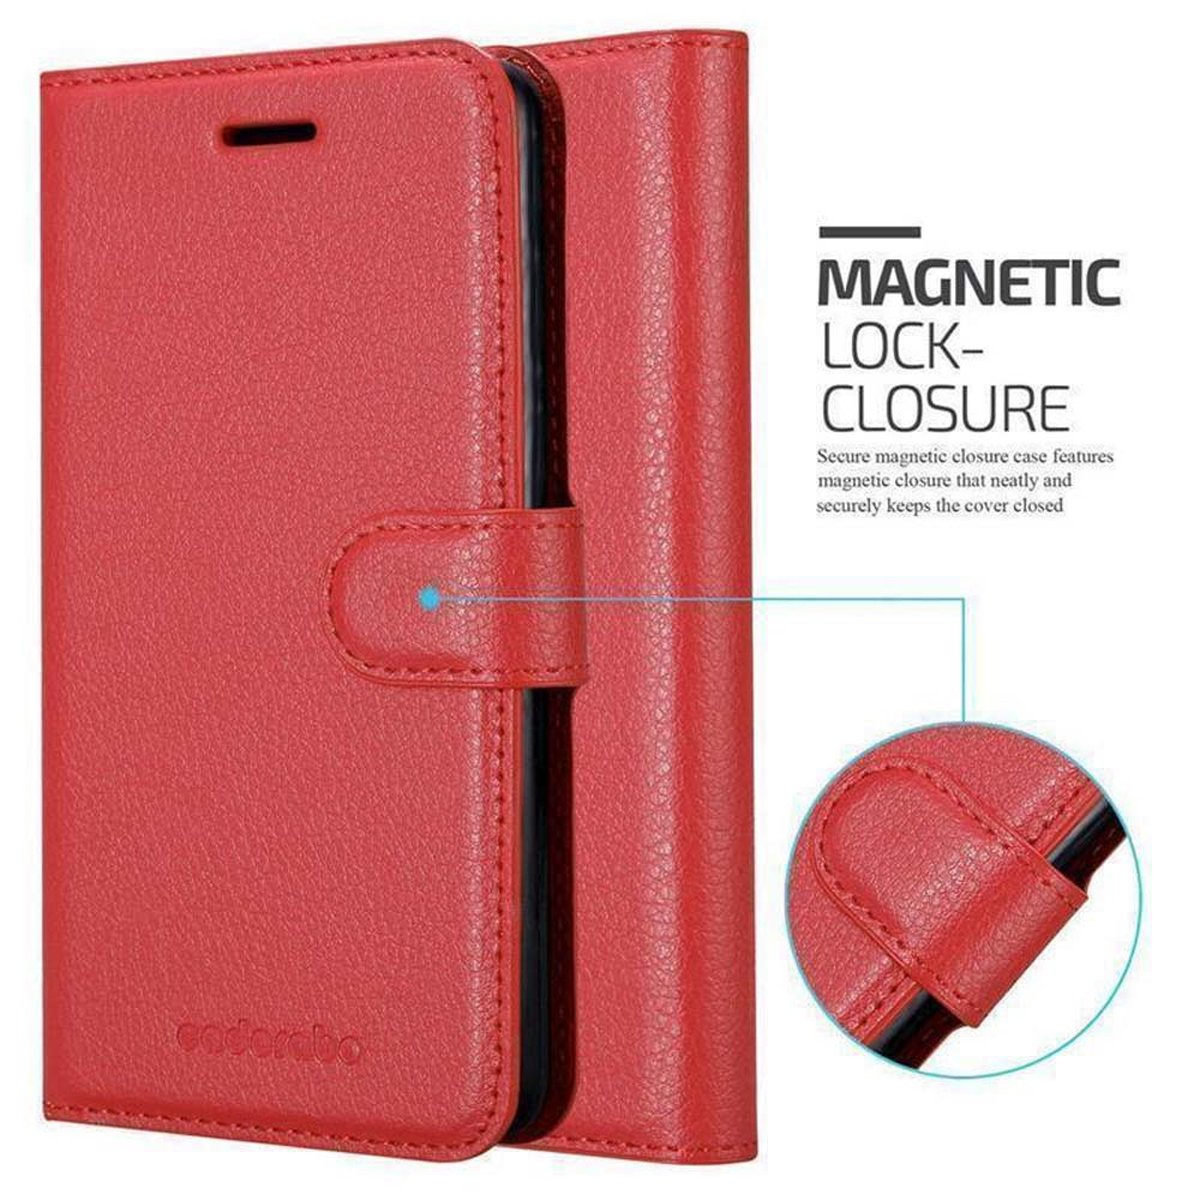 MAX KARMIN Bookcover, Standfunktion, 4 ZenFone Hülle ROT Book (5.5 CADORABO Asus, Zoll),